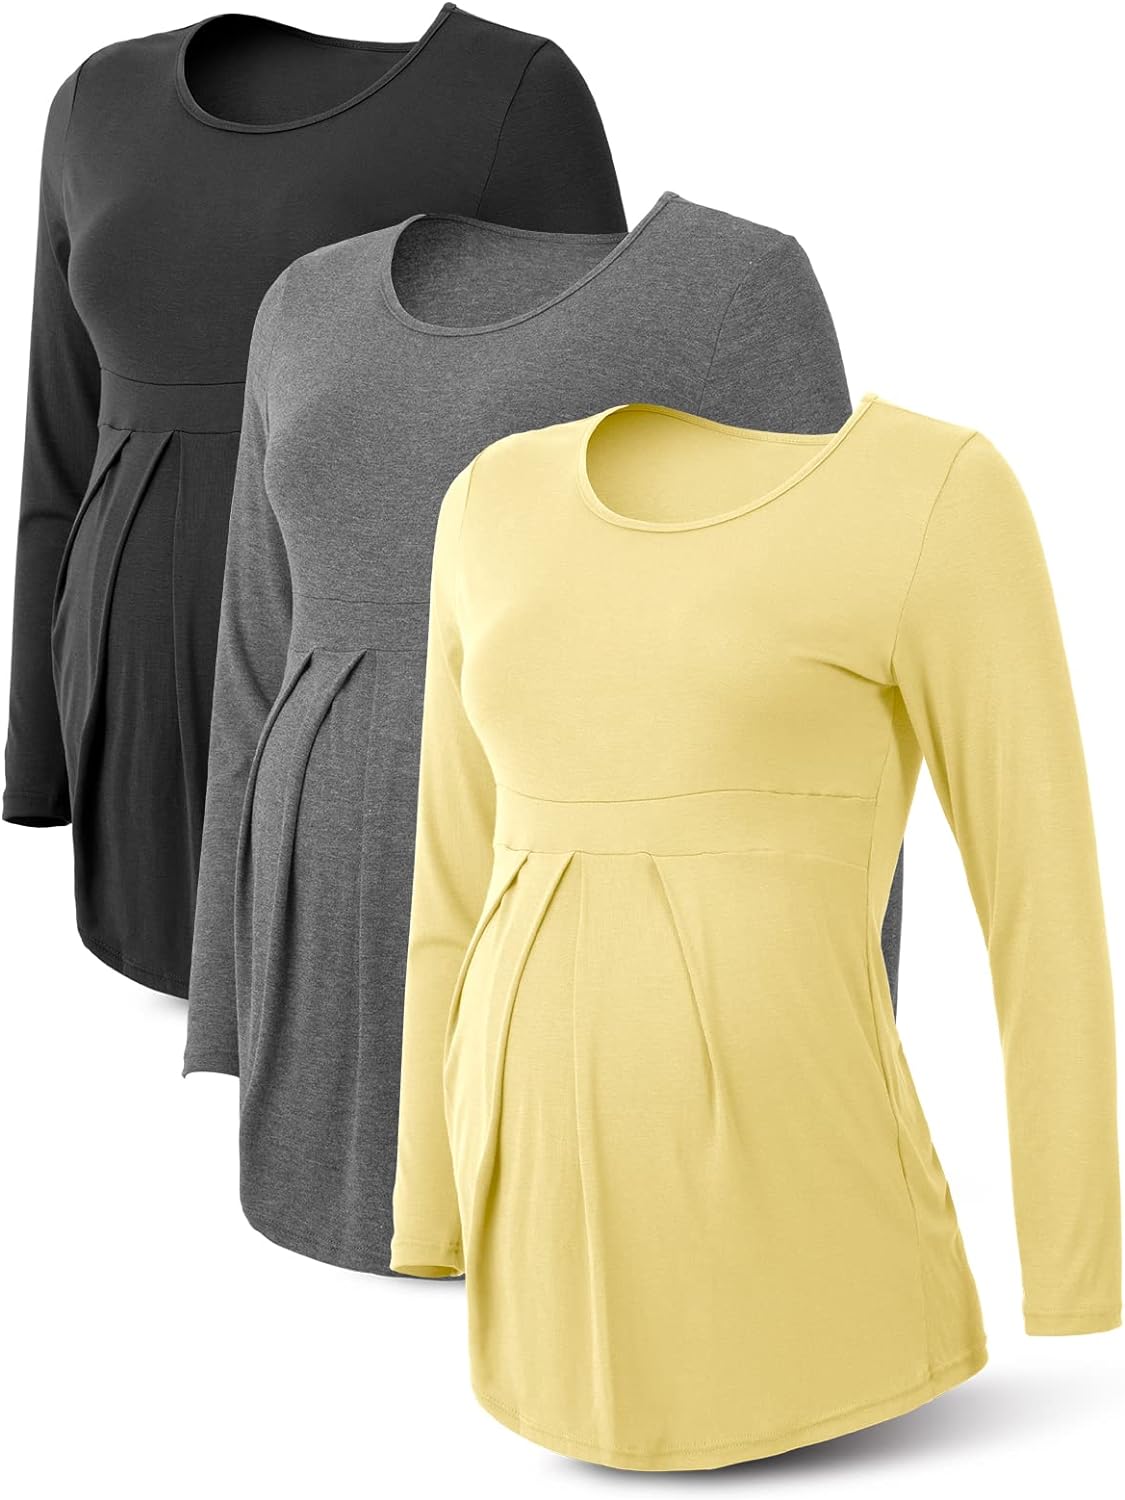 Stay Warm and Stylish with Rnxrbb Long Enough Maternity Shirts